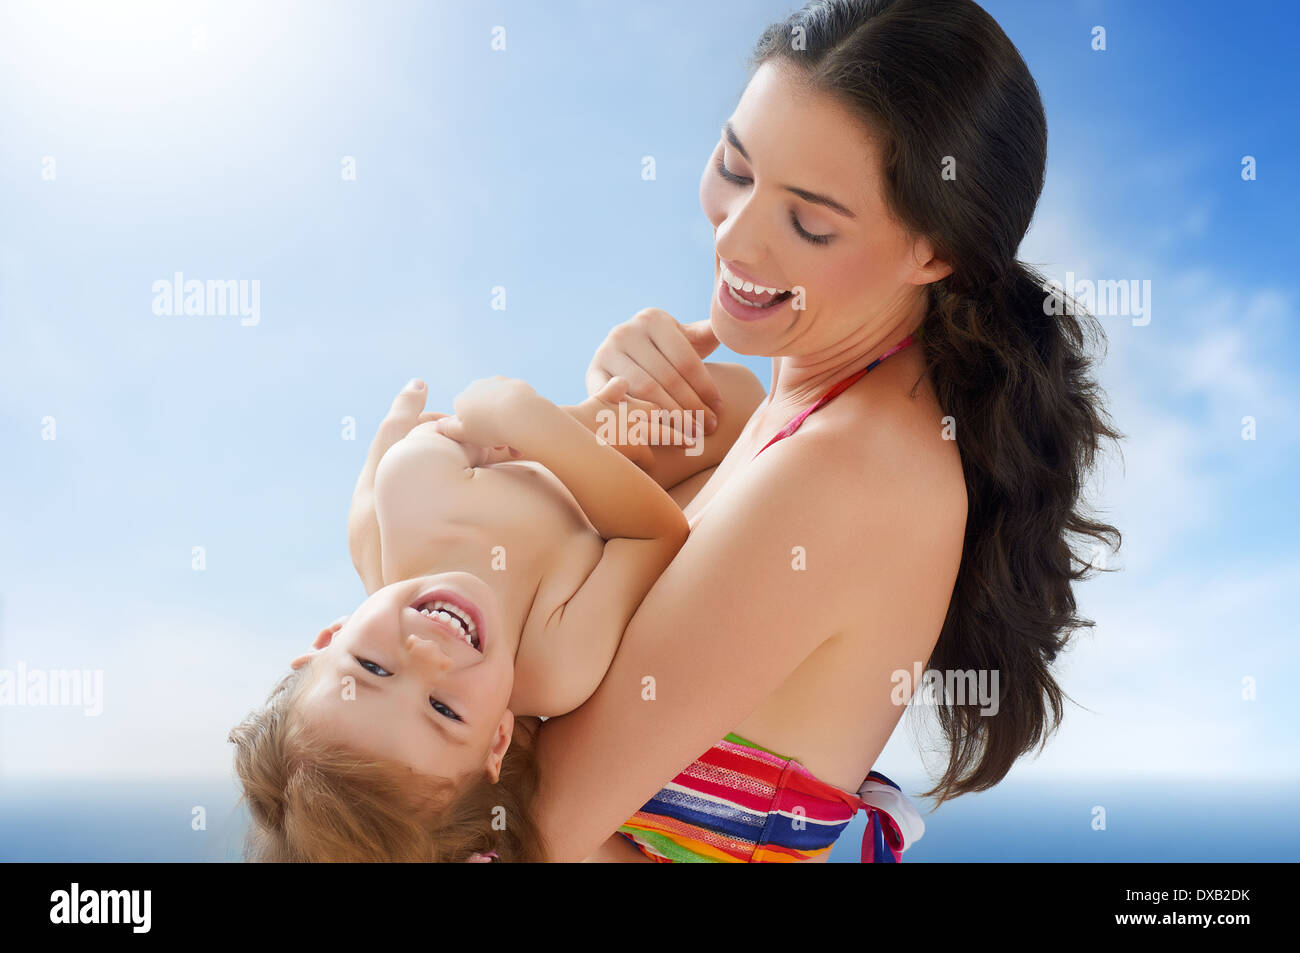 happy mother holding her child Stock Photo